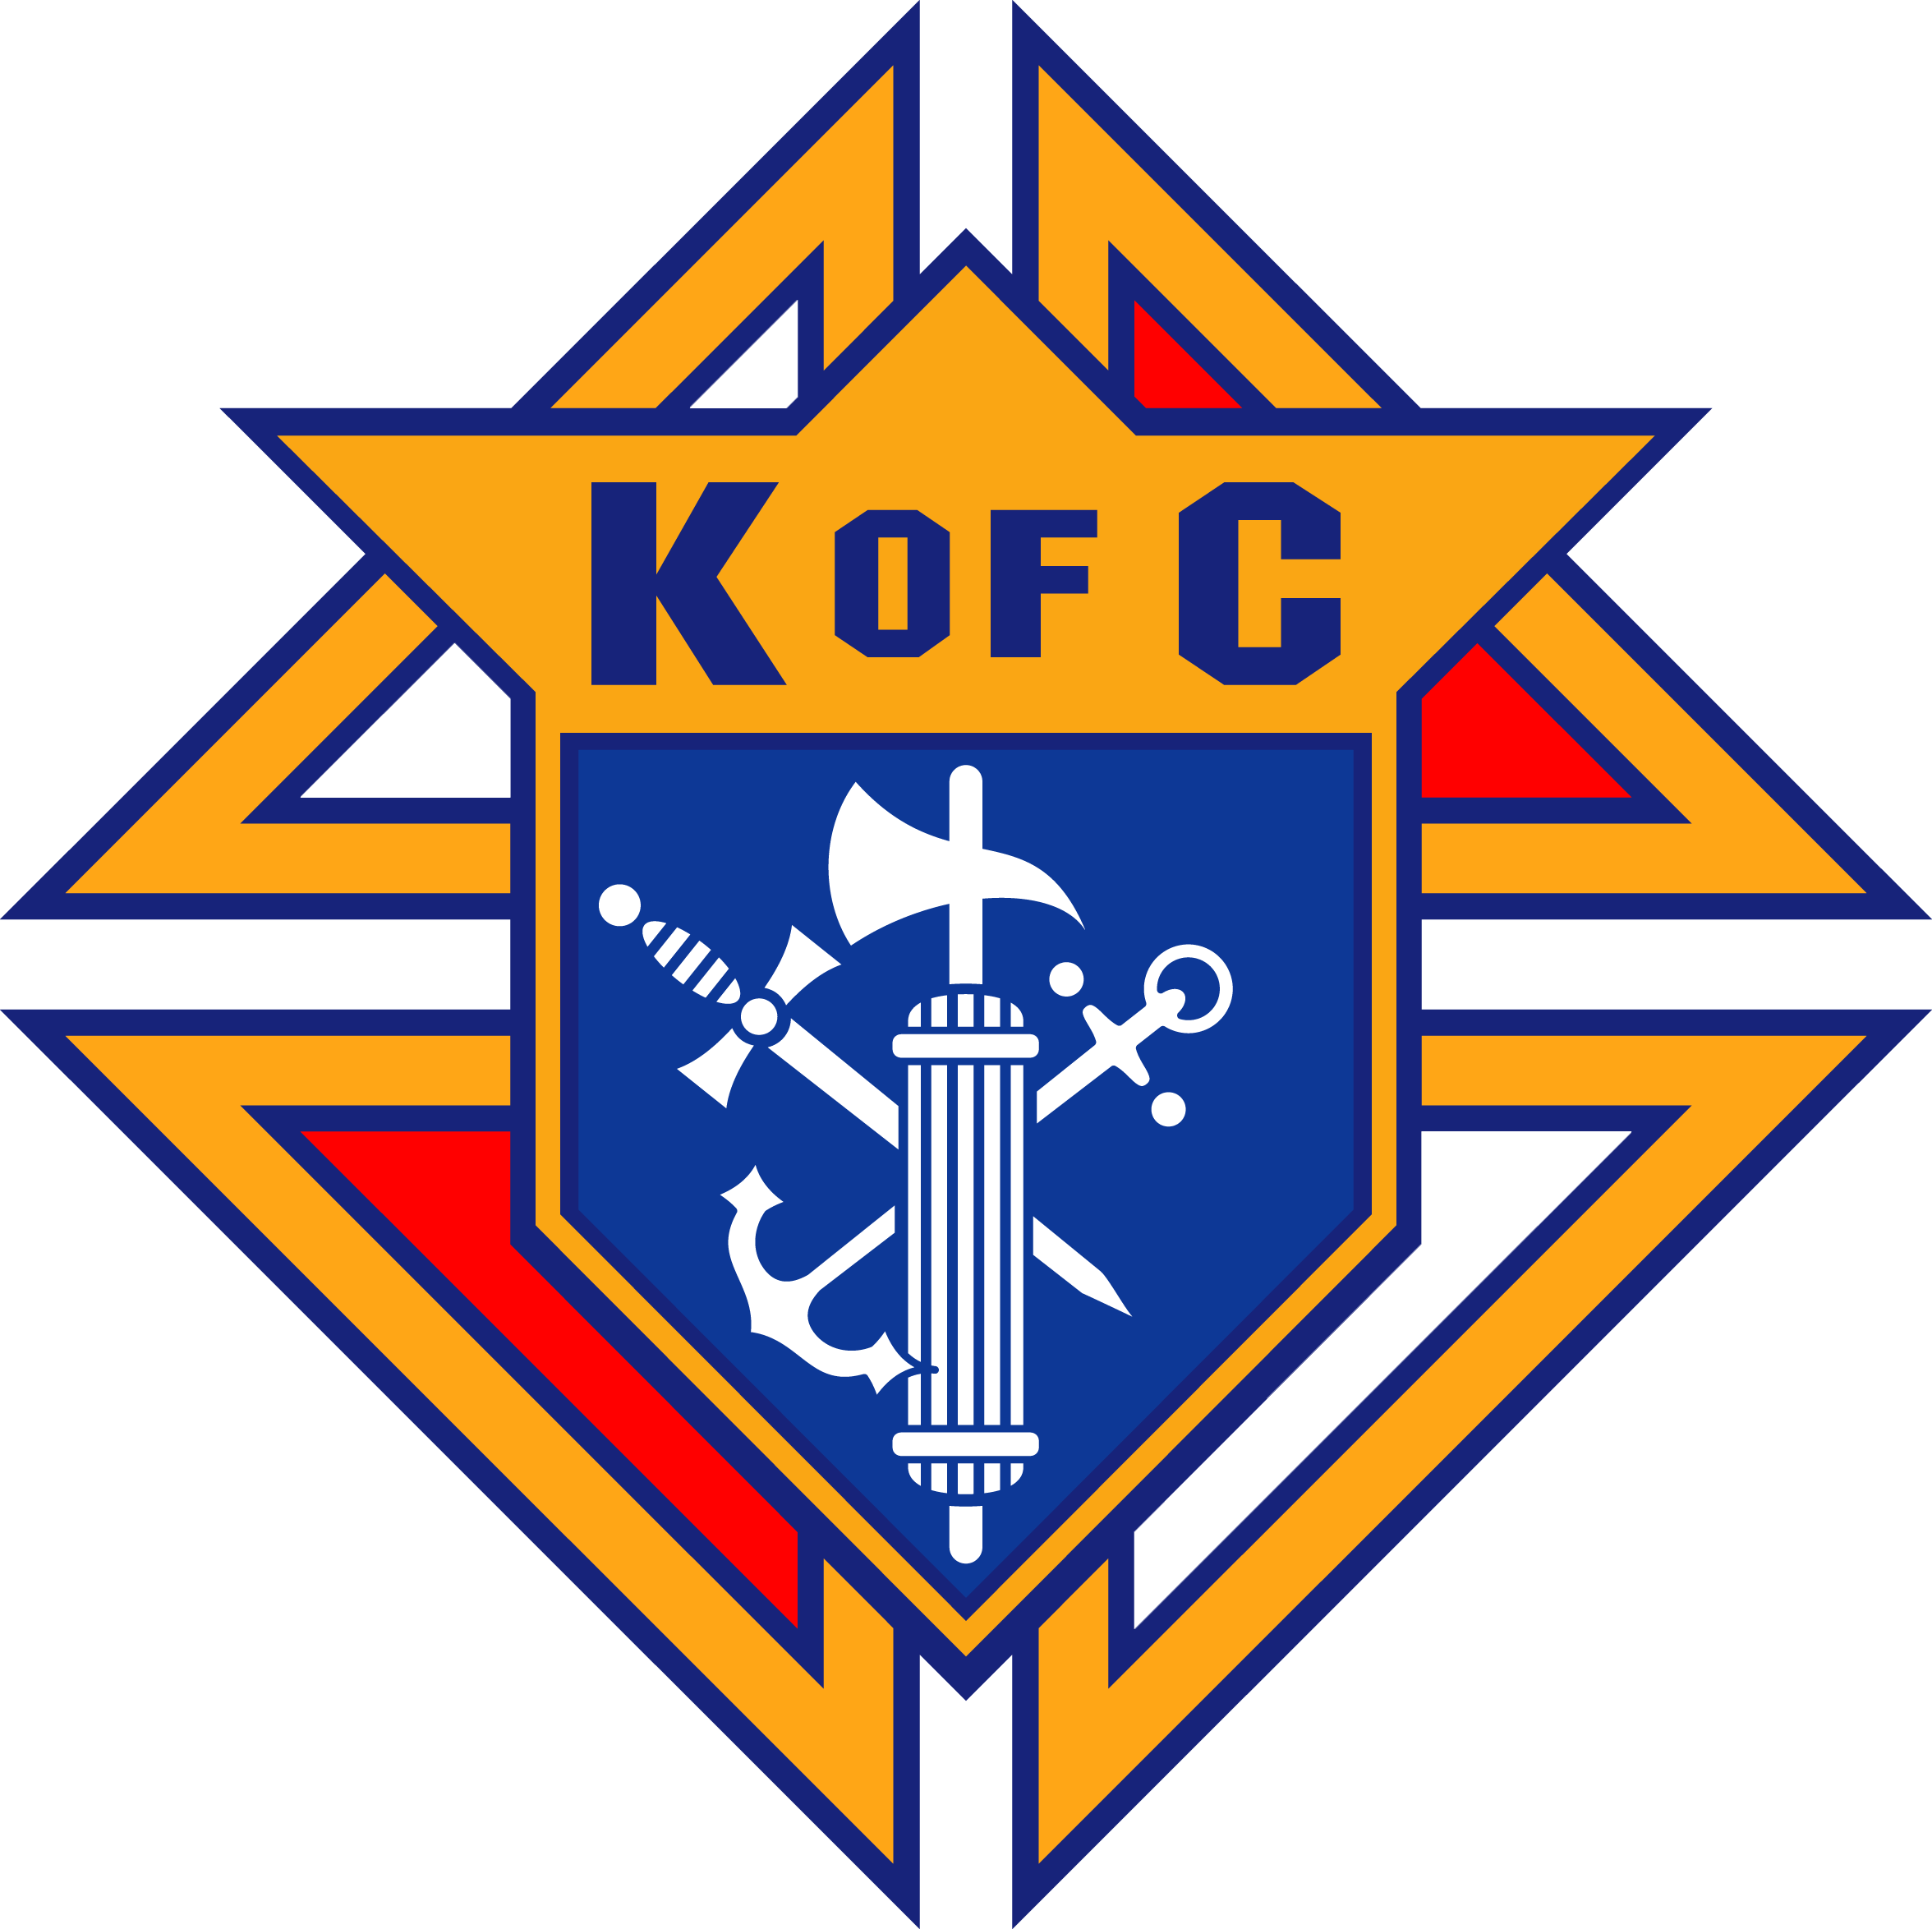 Annual Knights of Columbus fishing contest set for Feb 9.